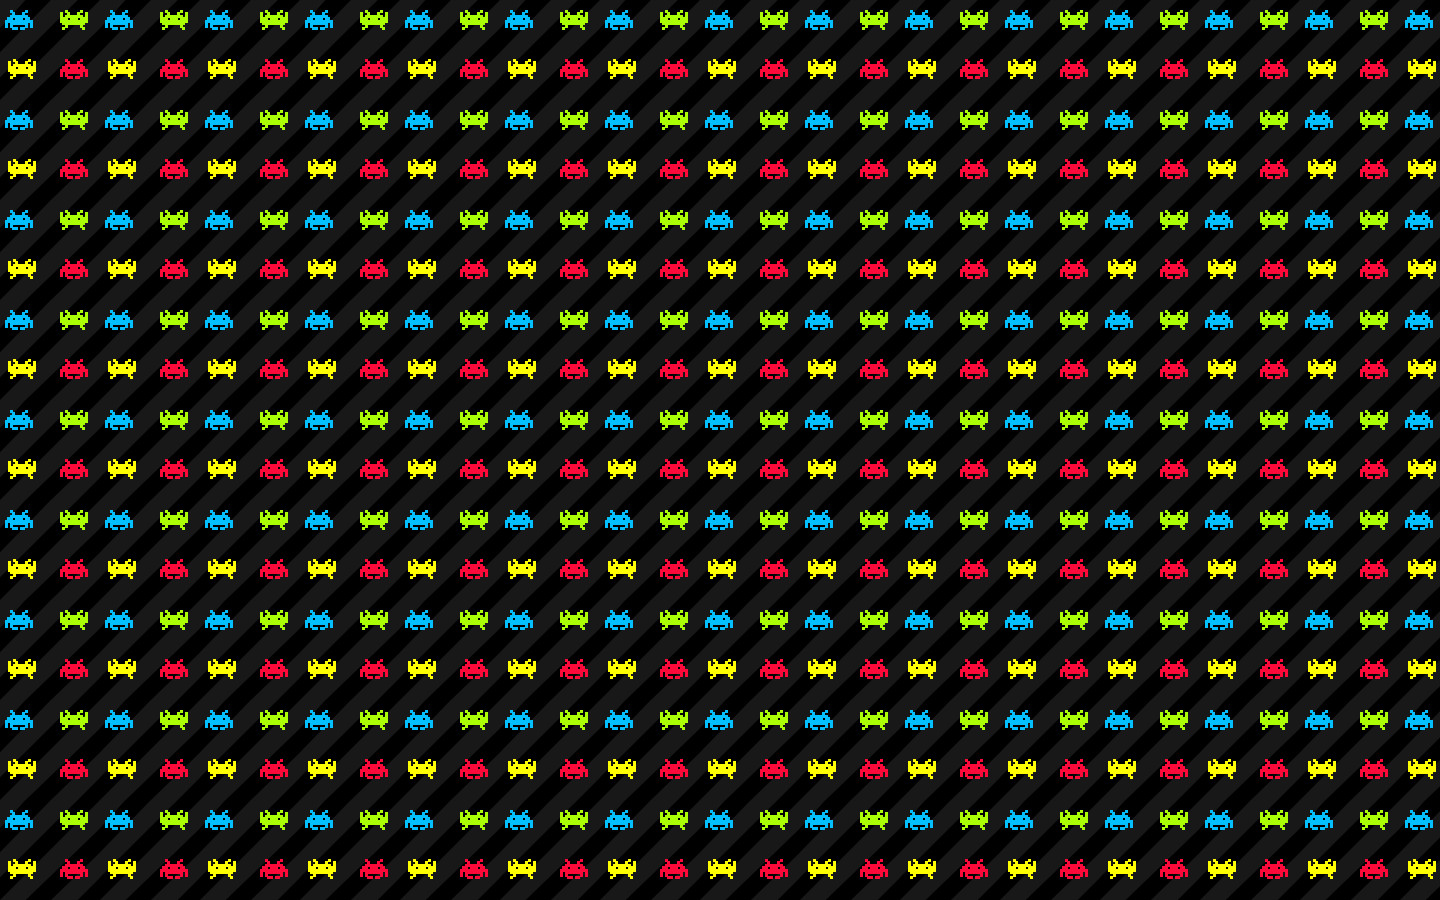 Space Invaders Wallpaper Xd By Xtamagotchi